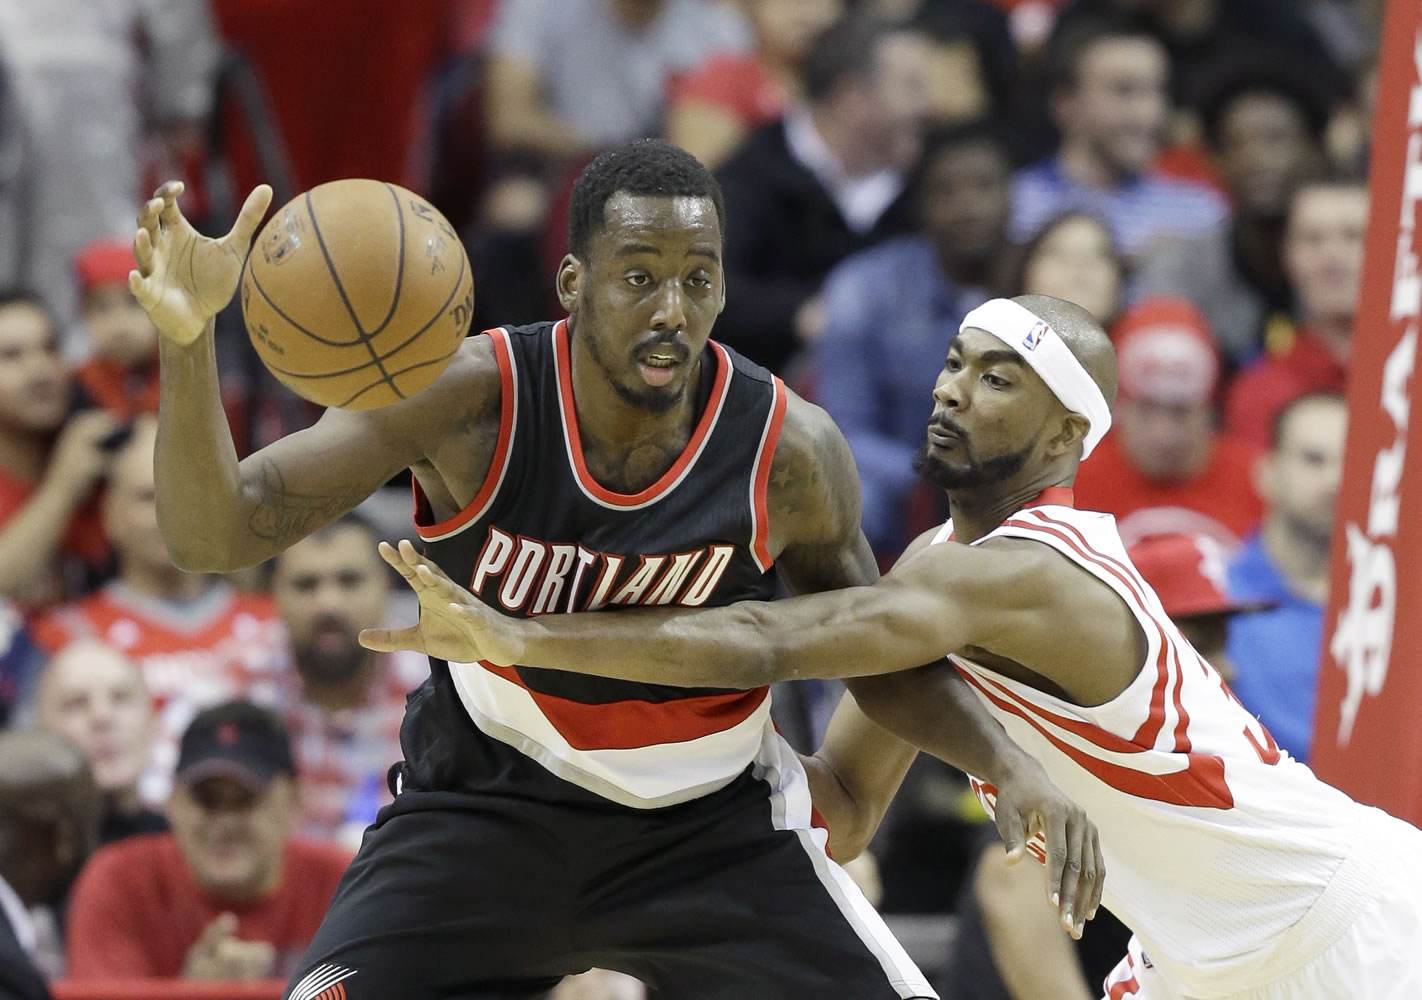 The Blazers’ Al-Farouq Aminu (left) is one of four NBA players with at least a 12.8 rebound percentage and taking more than 40 percent of their shots from 3-point range.